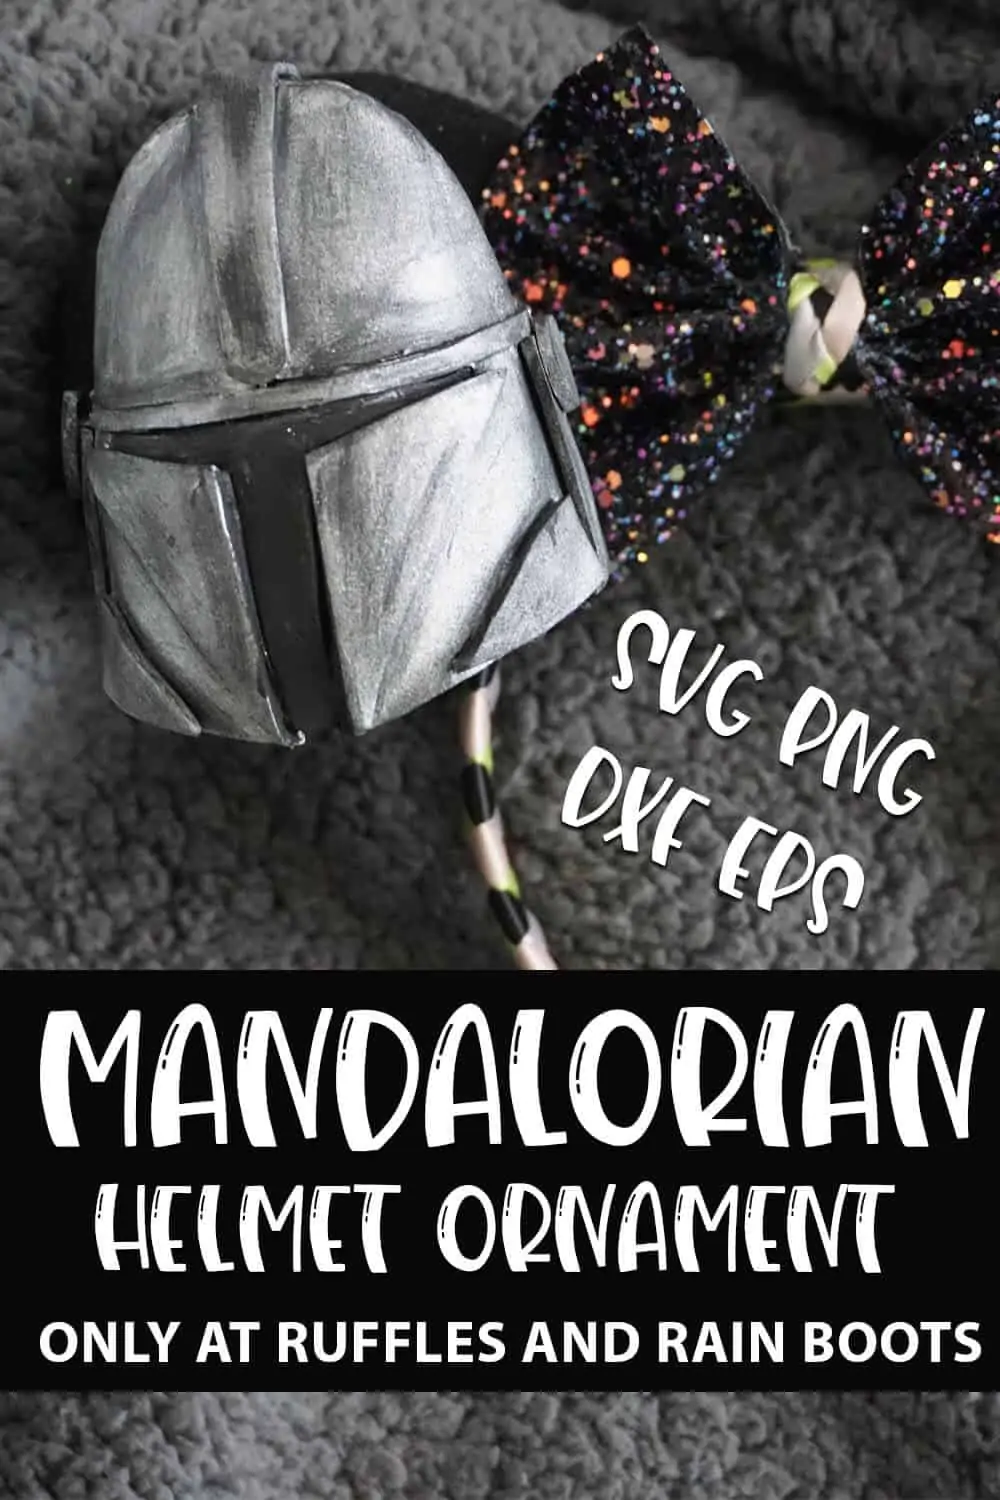 Mandalorian Helmet Ornament Pattern cut file set for cricut or silhouette with text which reads mandalorian helmet ornament svg png dxf eps